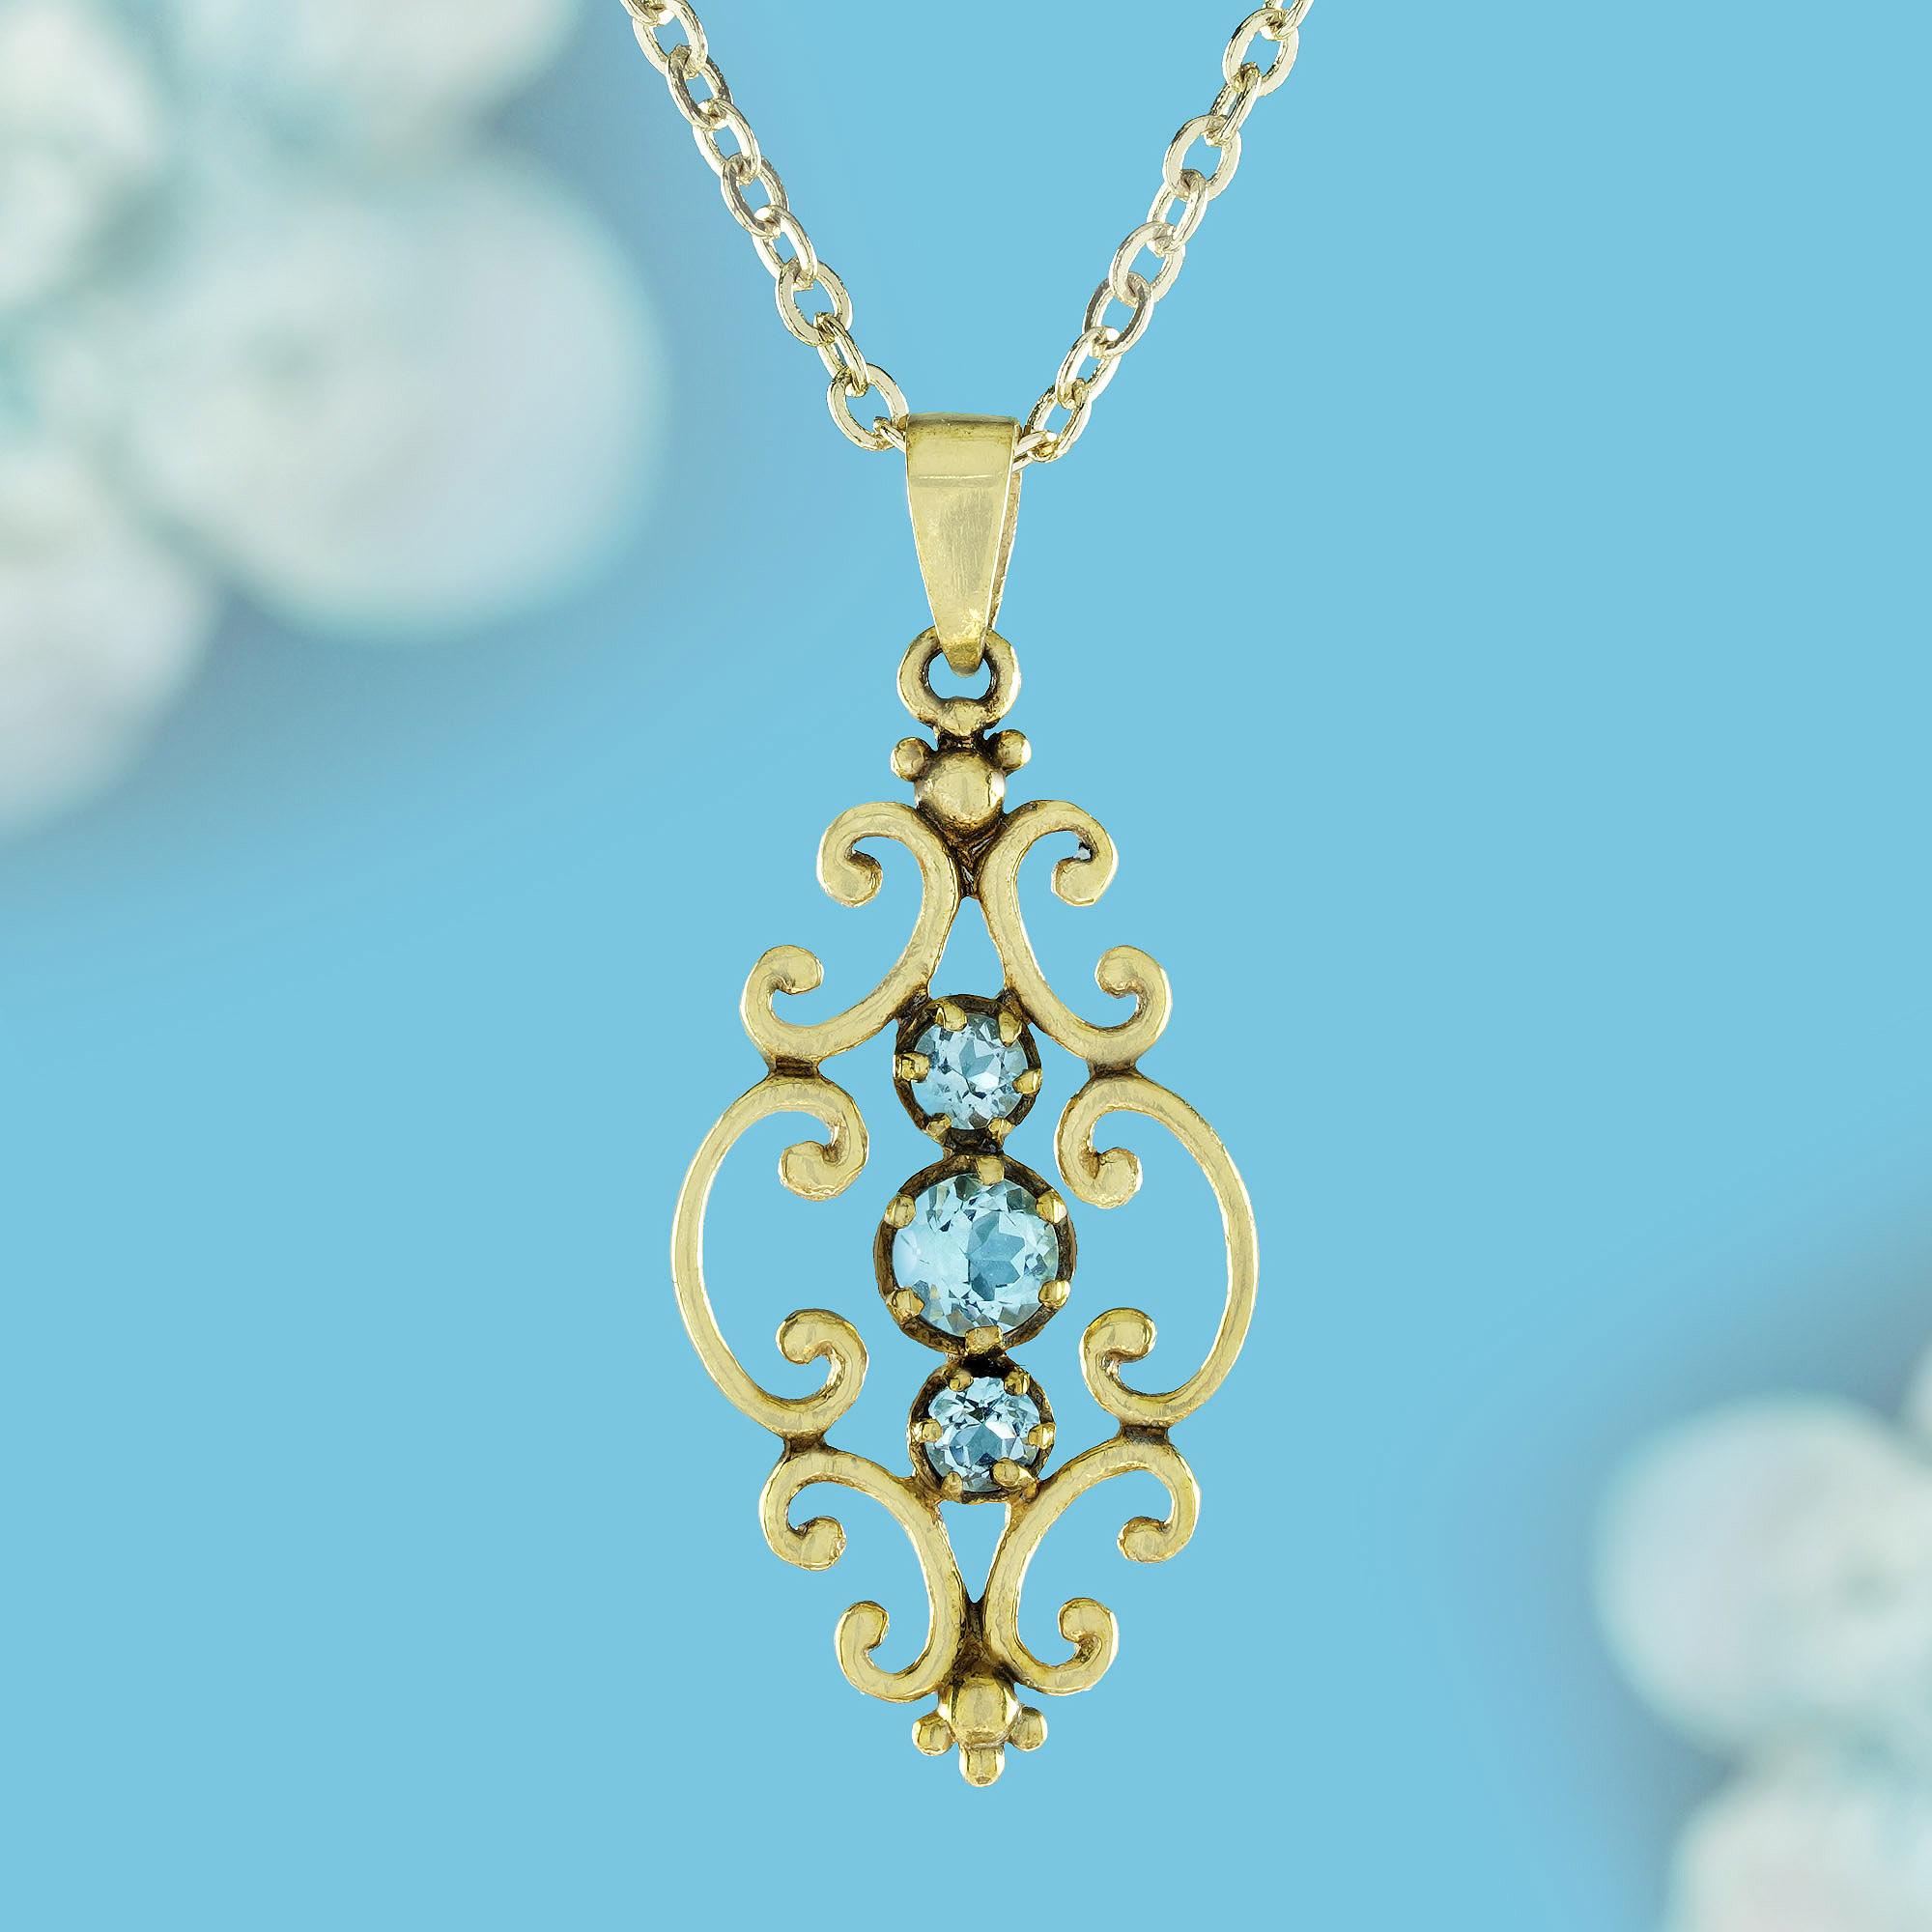 Unveil timeless elegance with our enchanting three-stone blue topaz pendant crafted in gleaming yellow gold. Each sky-blue topaz gemstone, a captivating round cut, is embraced by a delicate filigree design. This exquisite pendant whispers of a